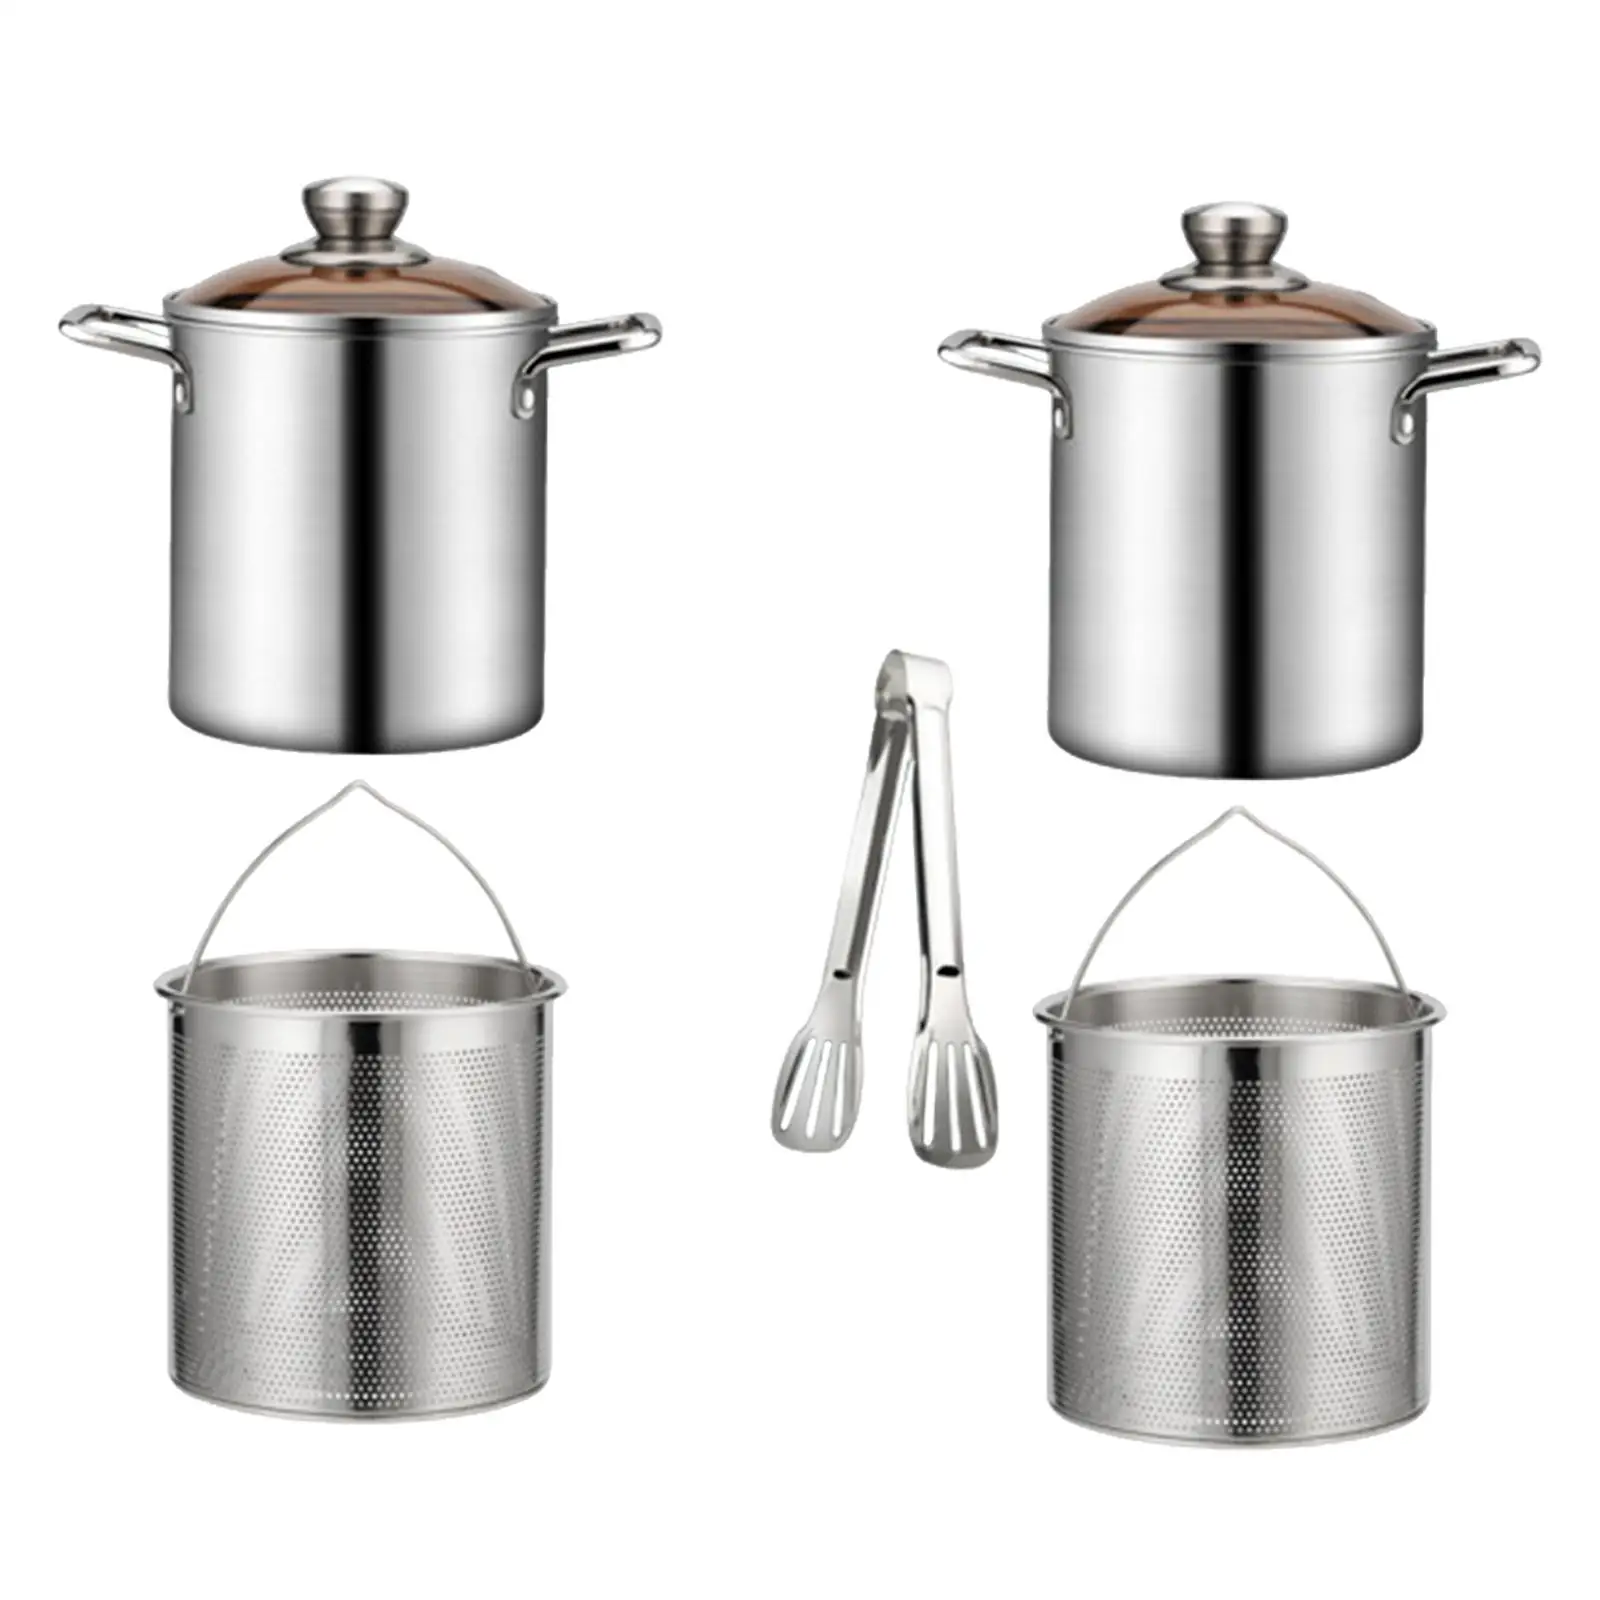 Stainless Steel Stockpot with Basket Clear Glass Lids All Hob Types Use Nonstick Deep Frying Pot Seafood Boil Pot Cooking Pot